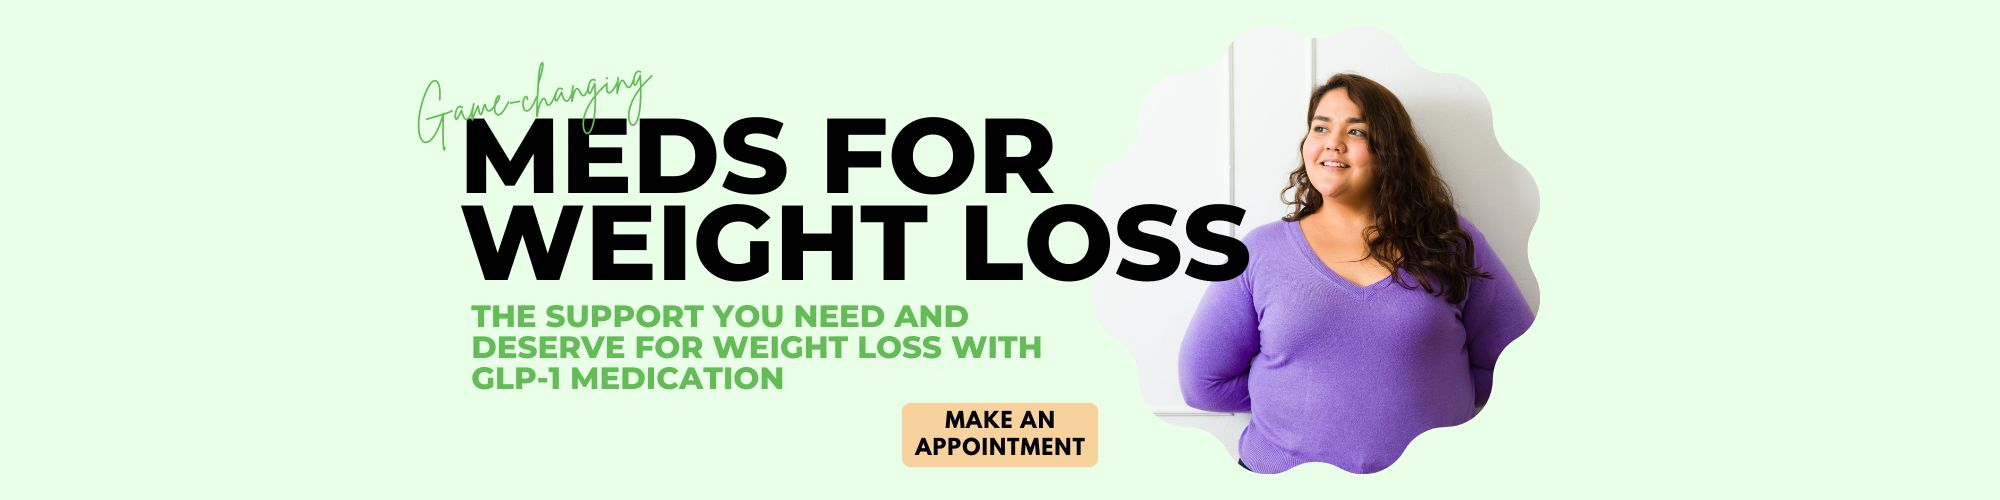 Game-changing Medication for Weight Loss. The Support you need and deserve for weight loss with GLP-1 Medication.